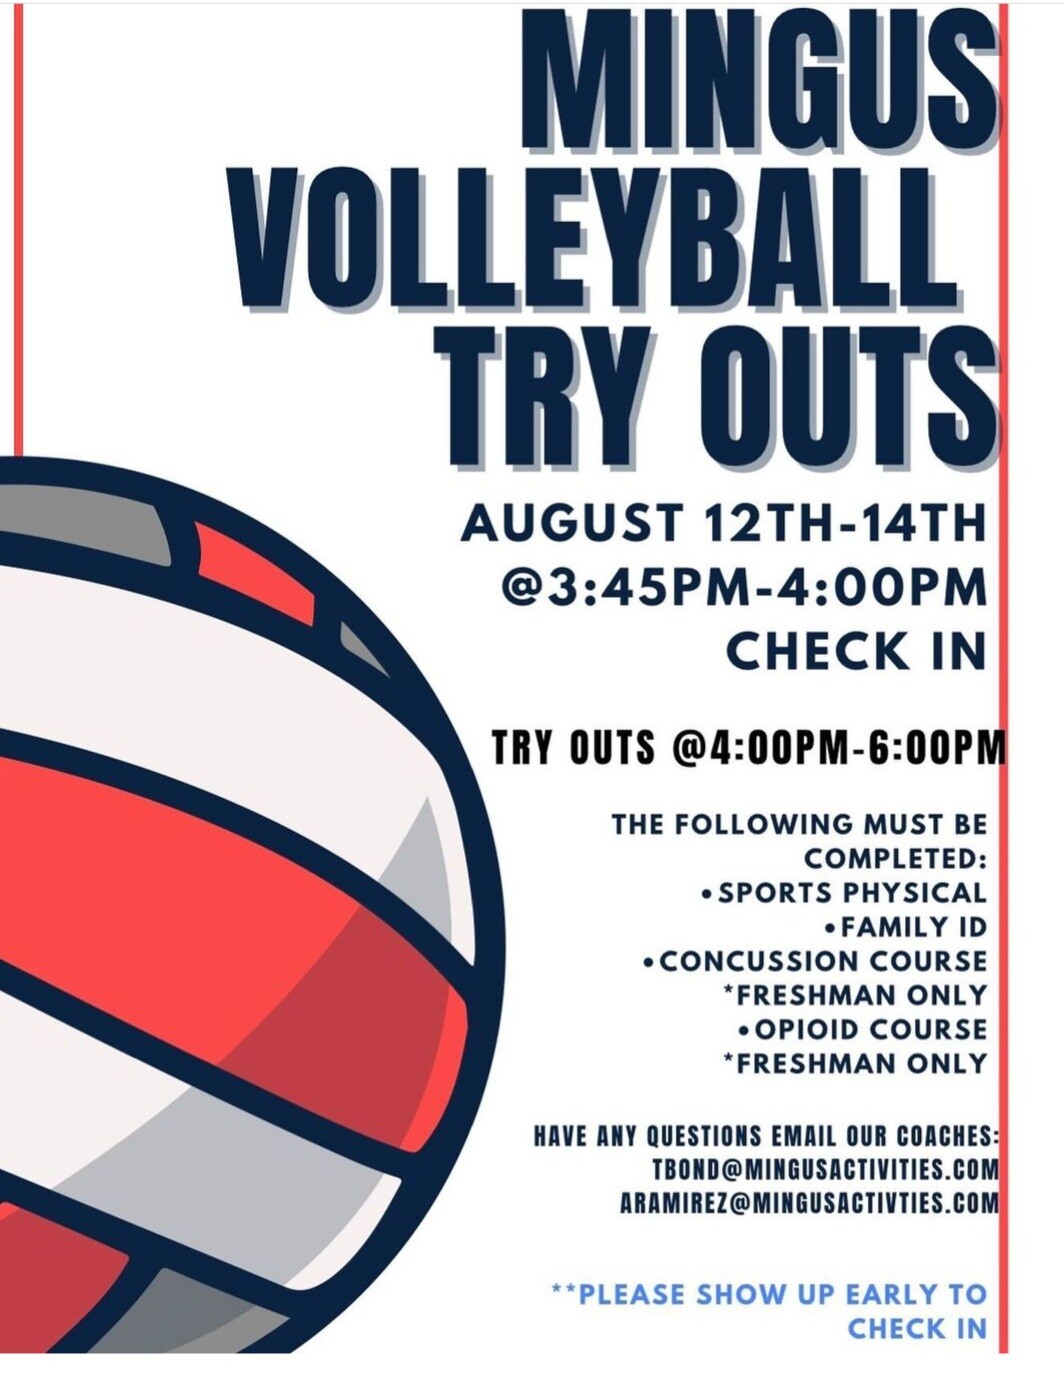 Mingus Volleyball Try Outs flyer